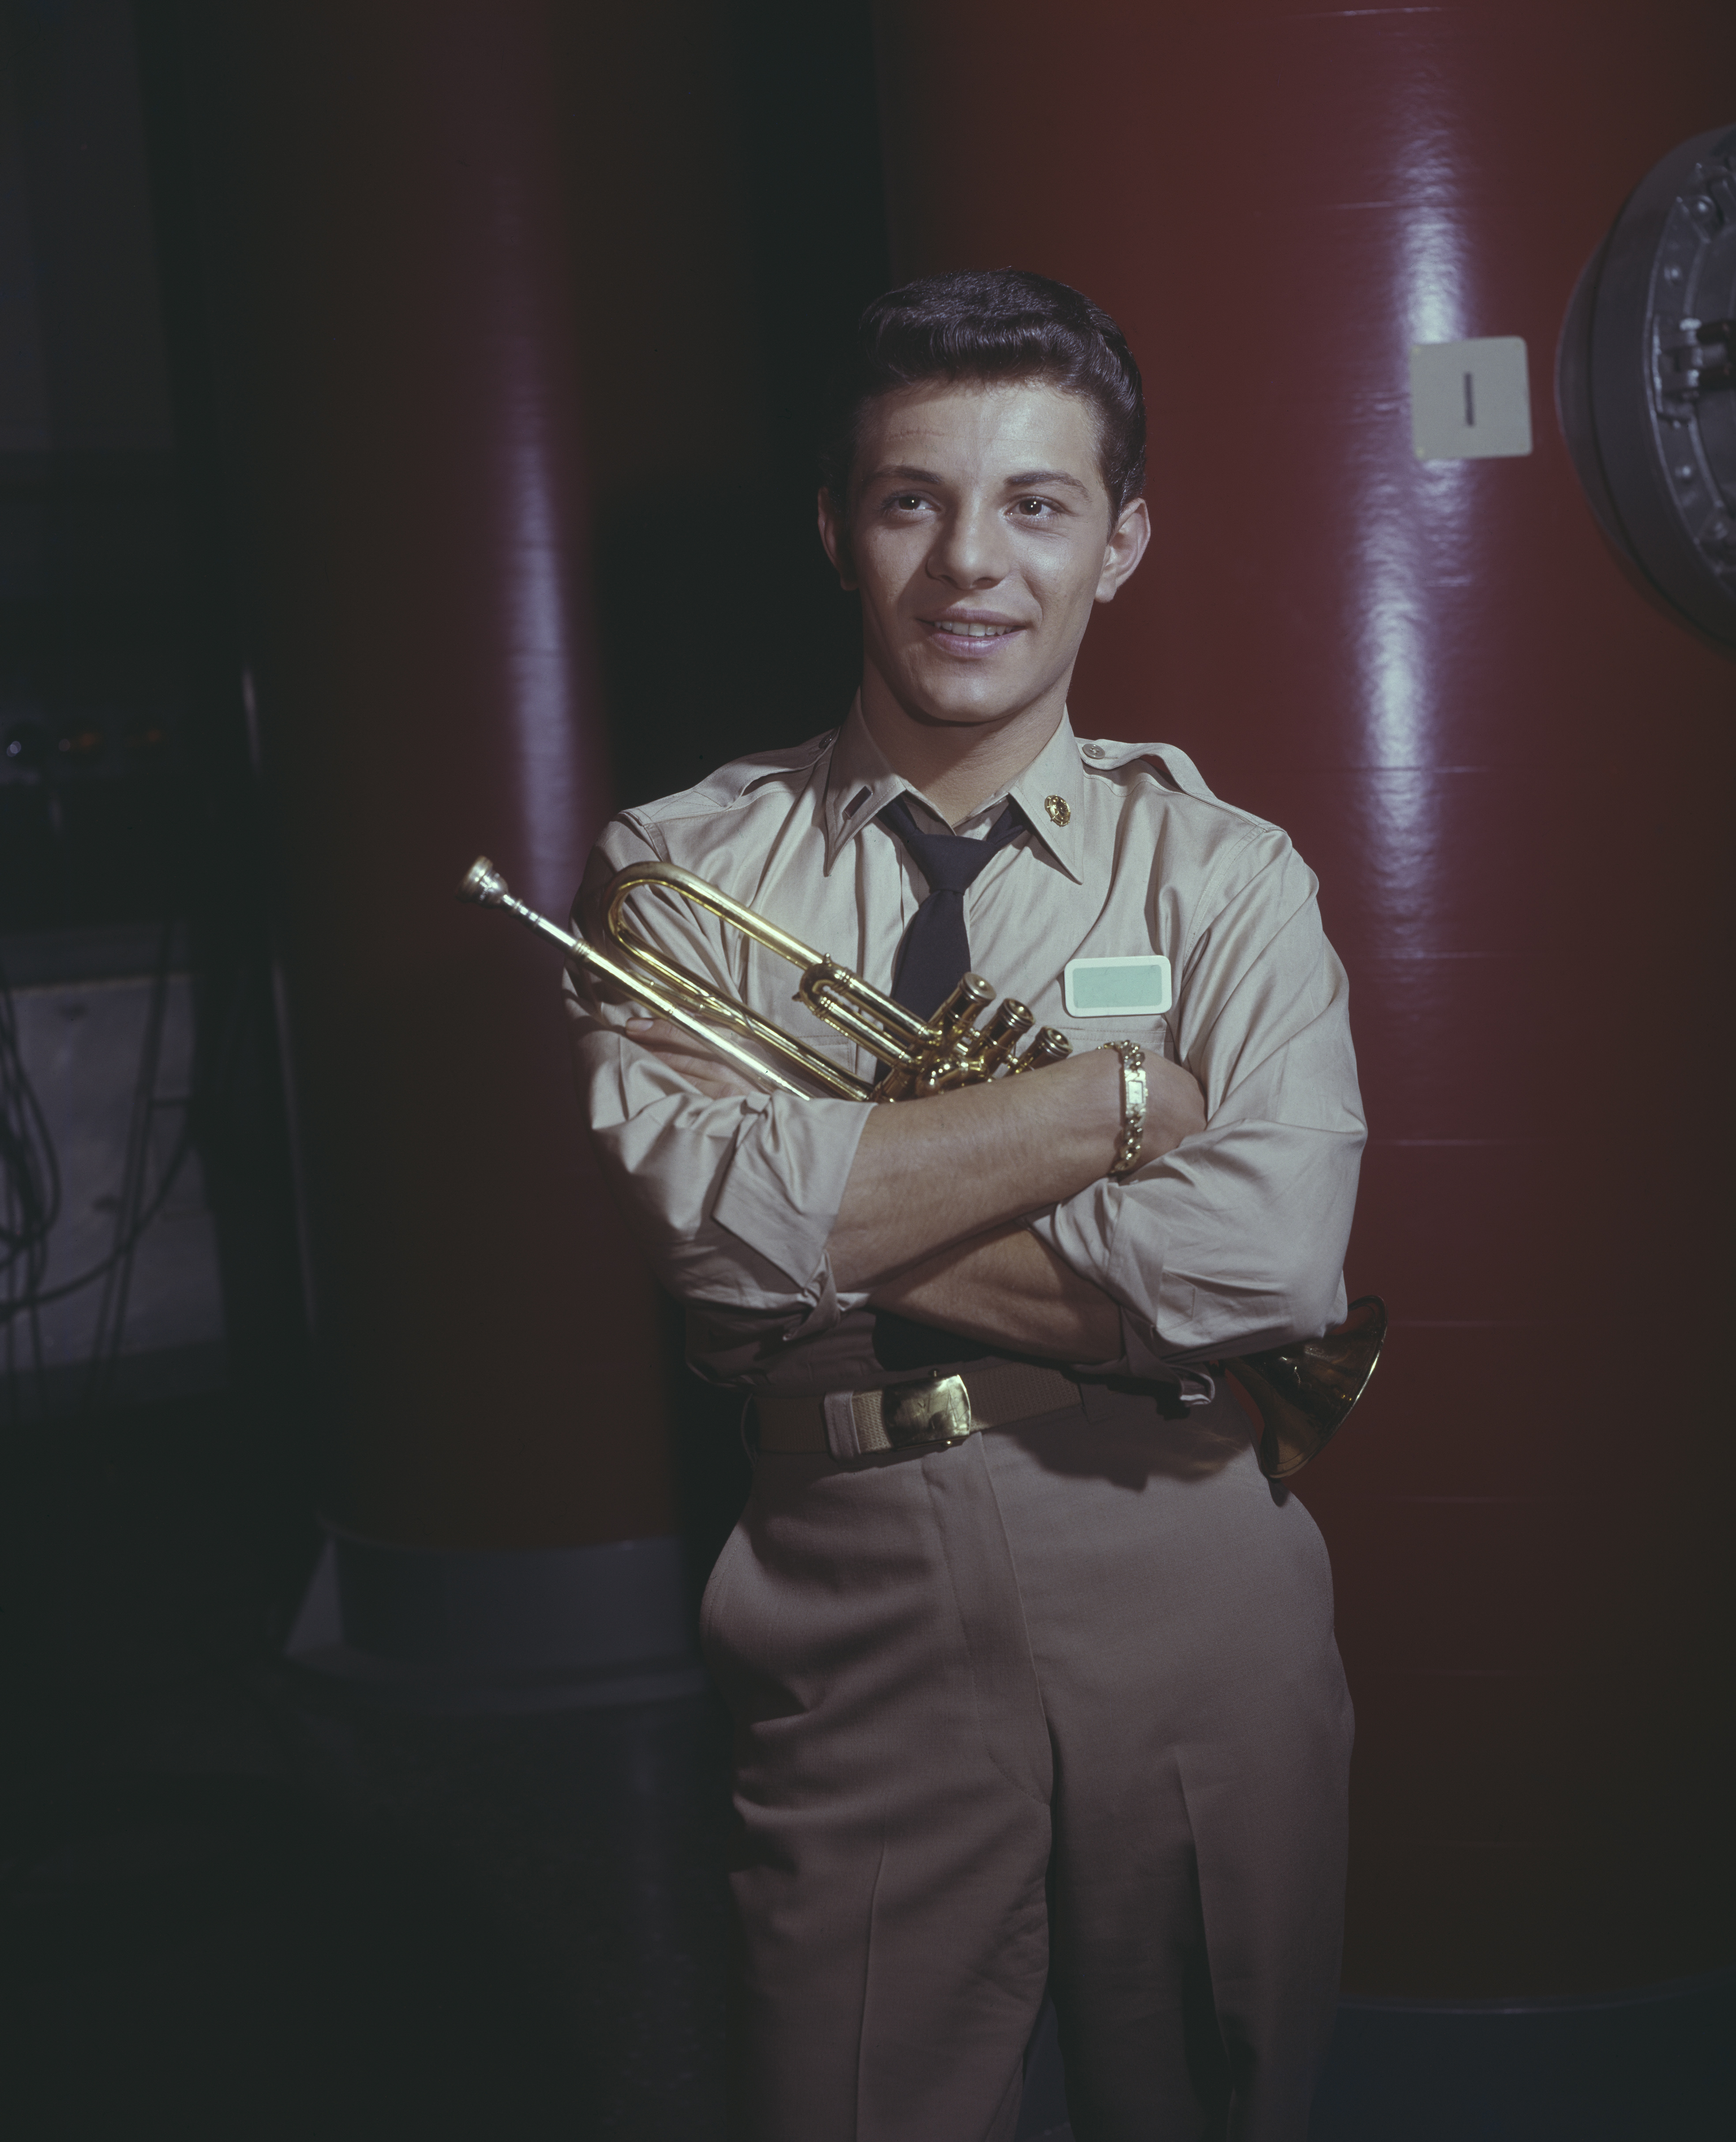 Frankie Avalon on the set of "Voyage to the Bottom of the Sea" in 1961 | Source: Getty Images